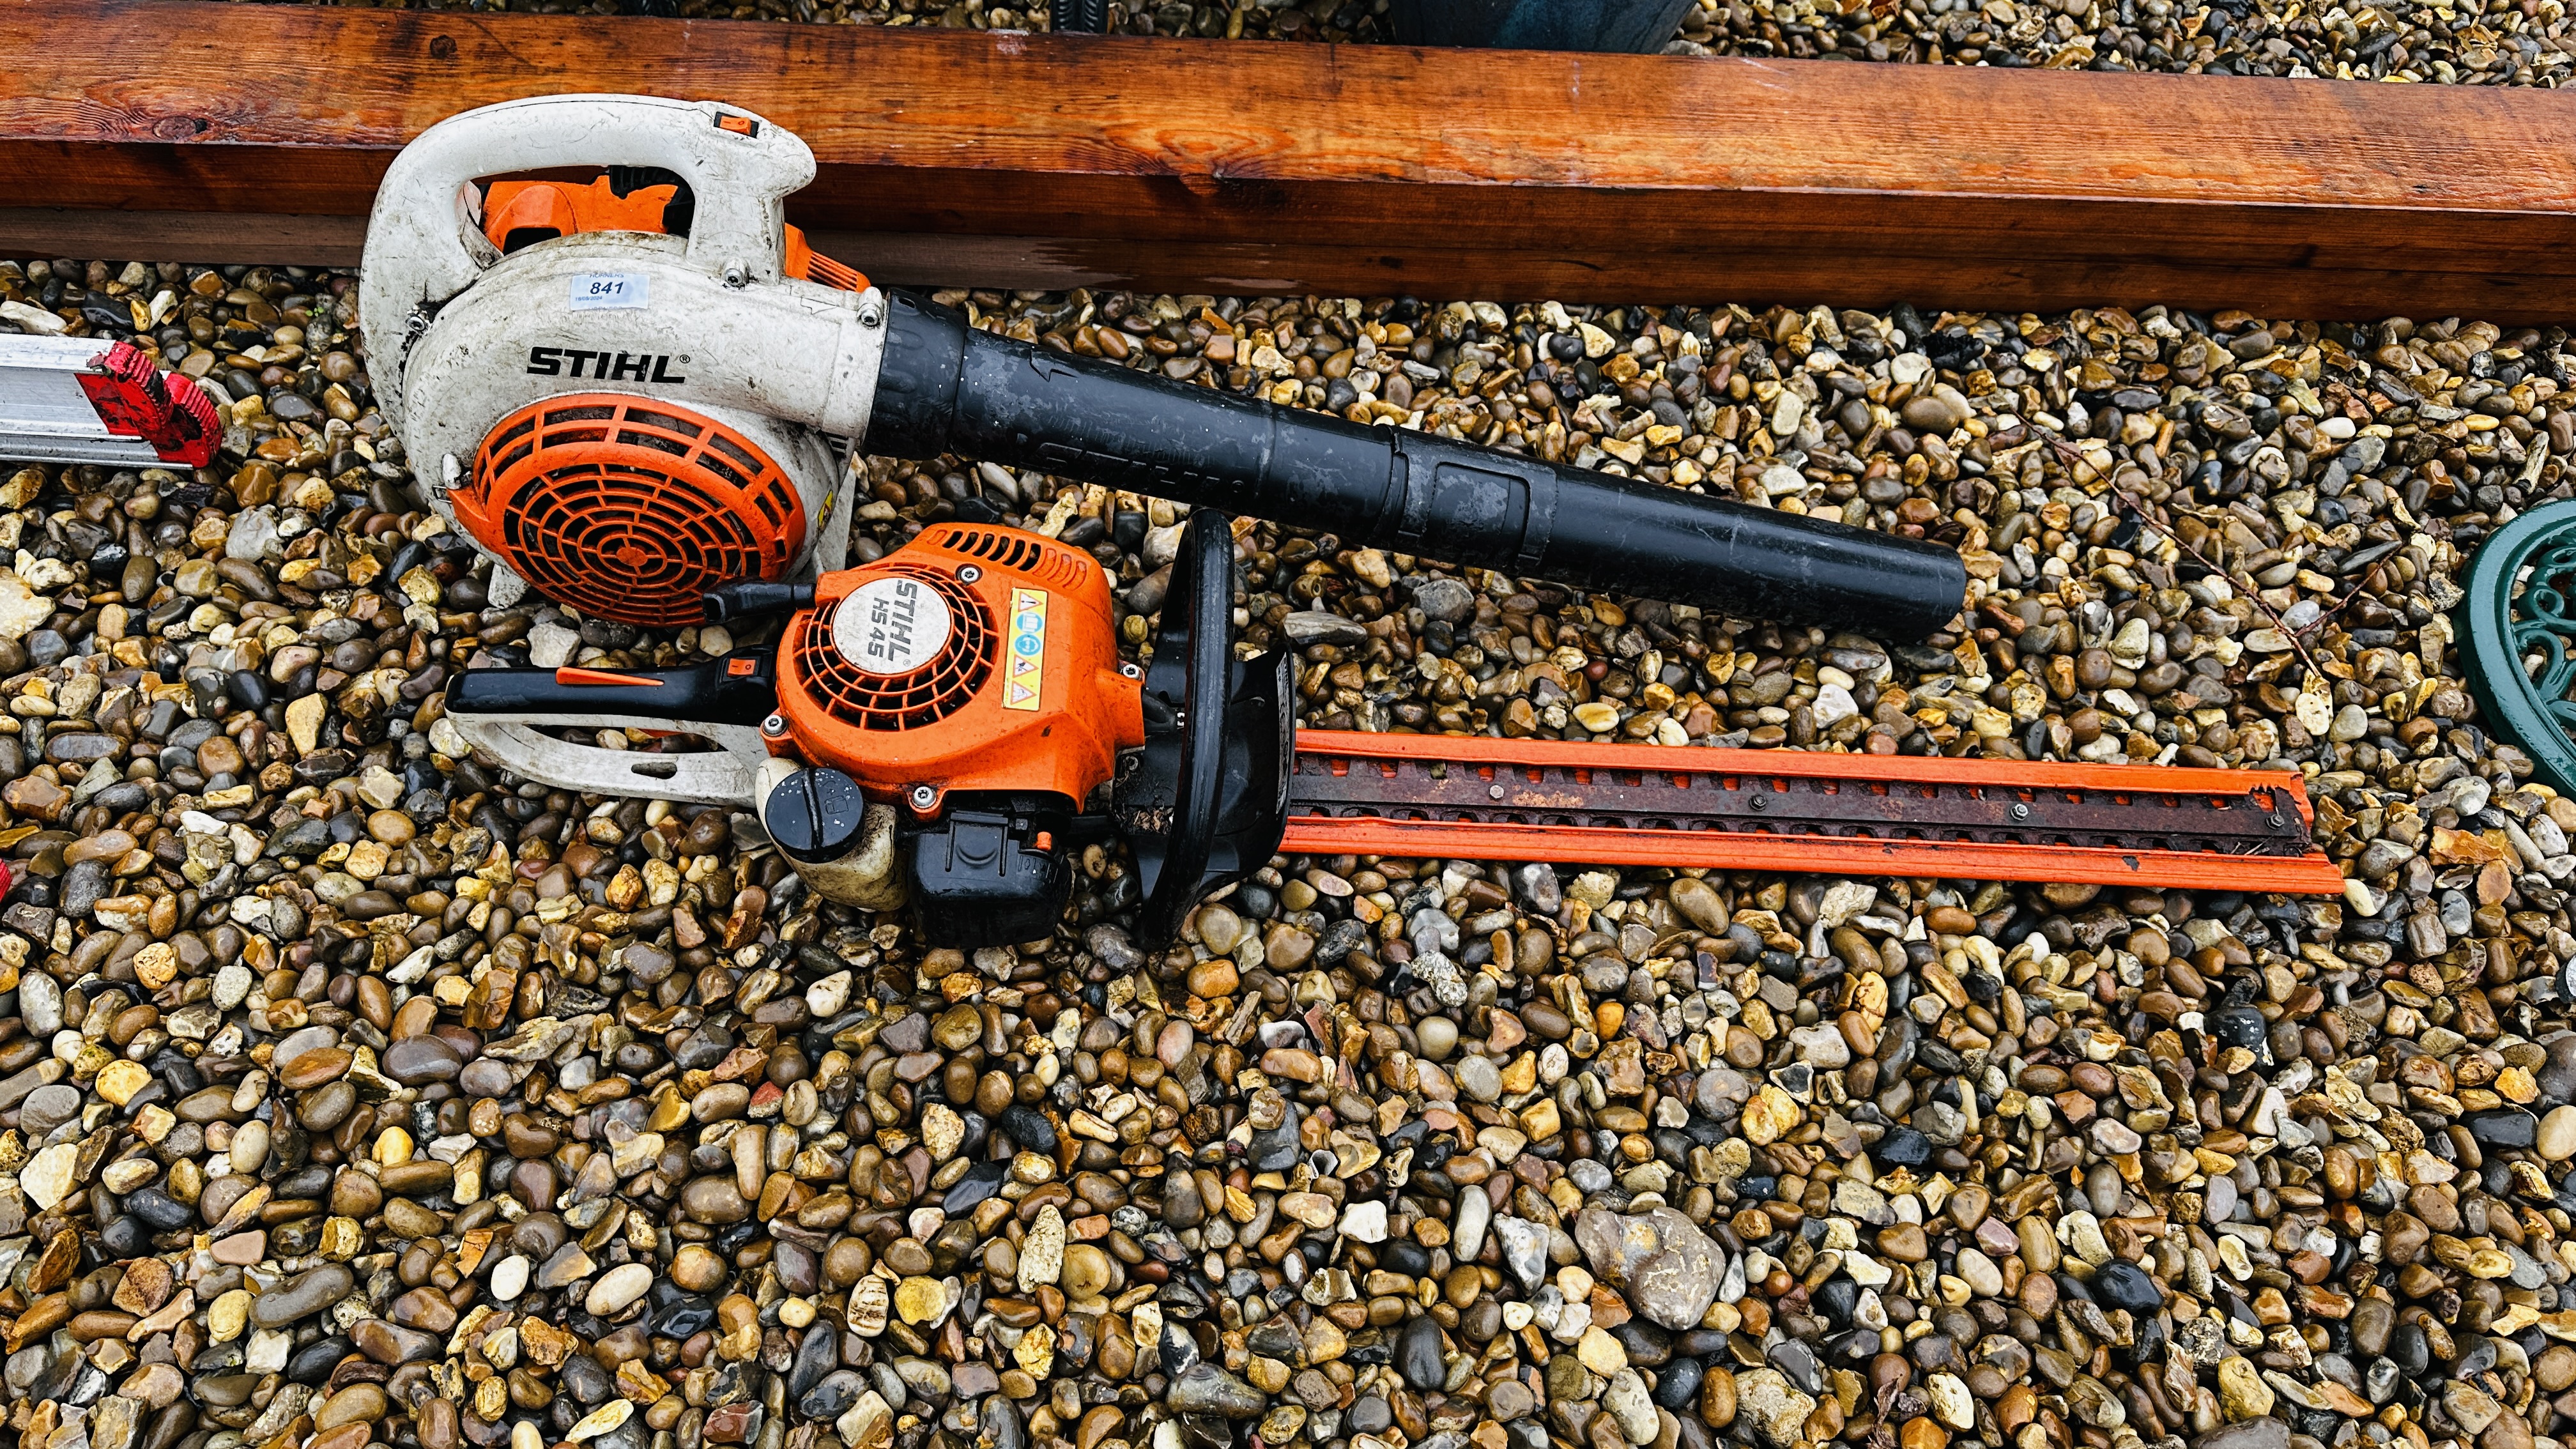 STIHL PETROL DRIVEN GARDEN BLOWER AND STIHL HS45 PETROL DRIVEN HEDGE TRIMMER - AS CLEARED,